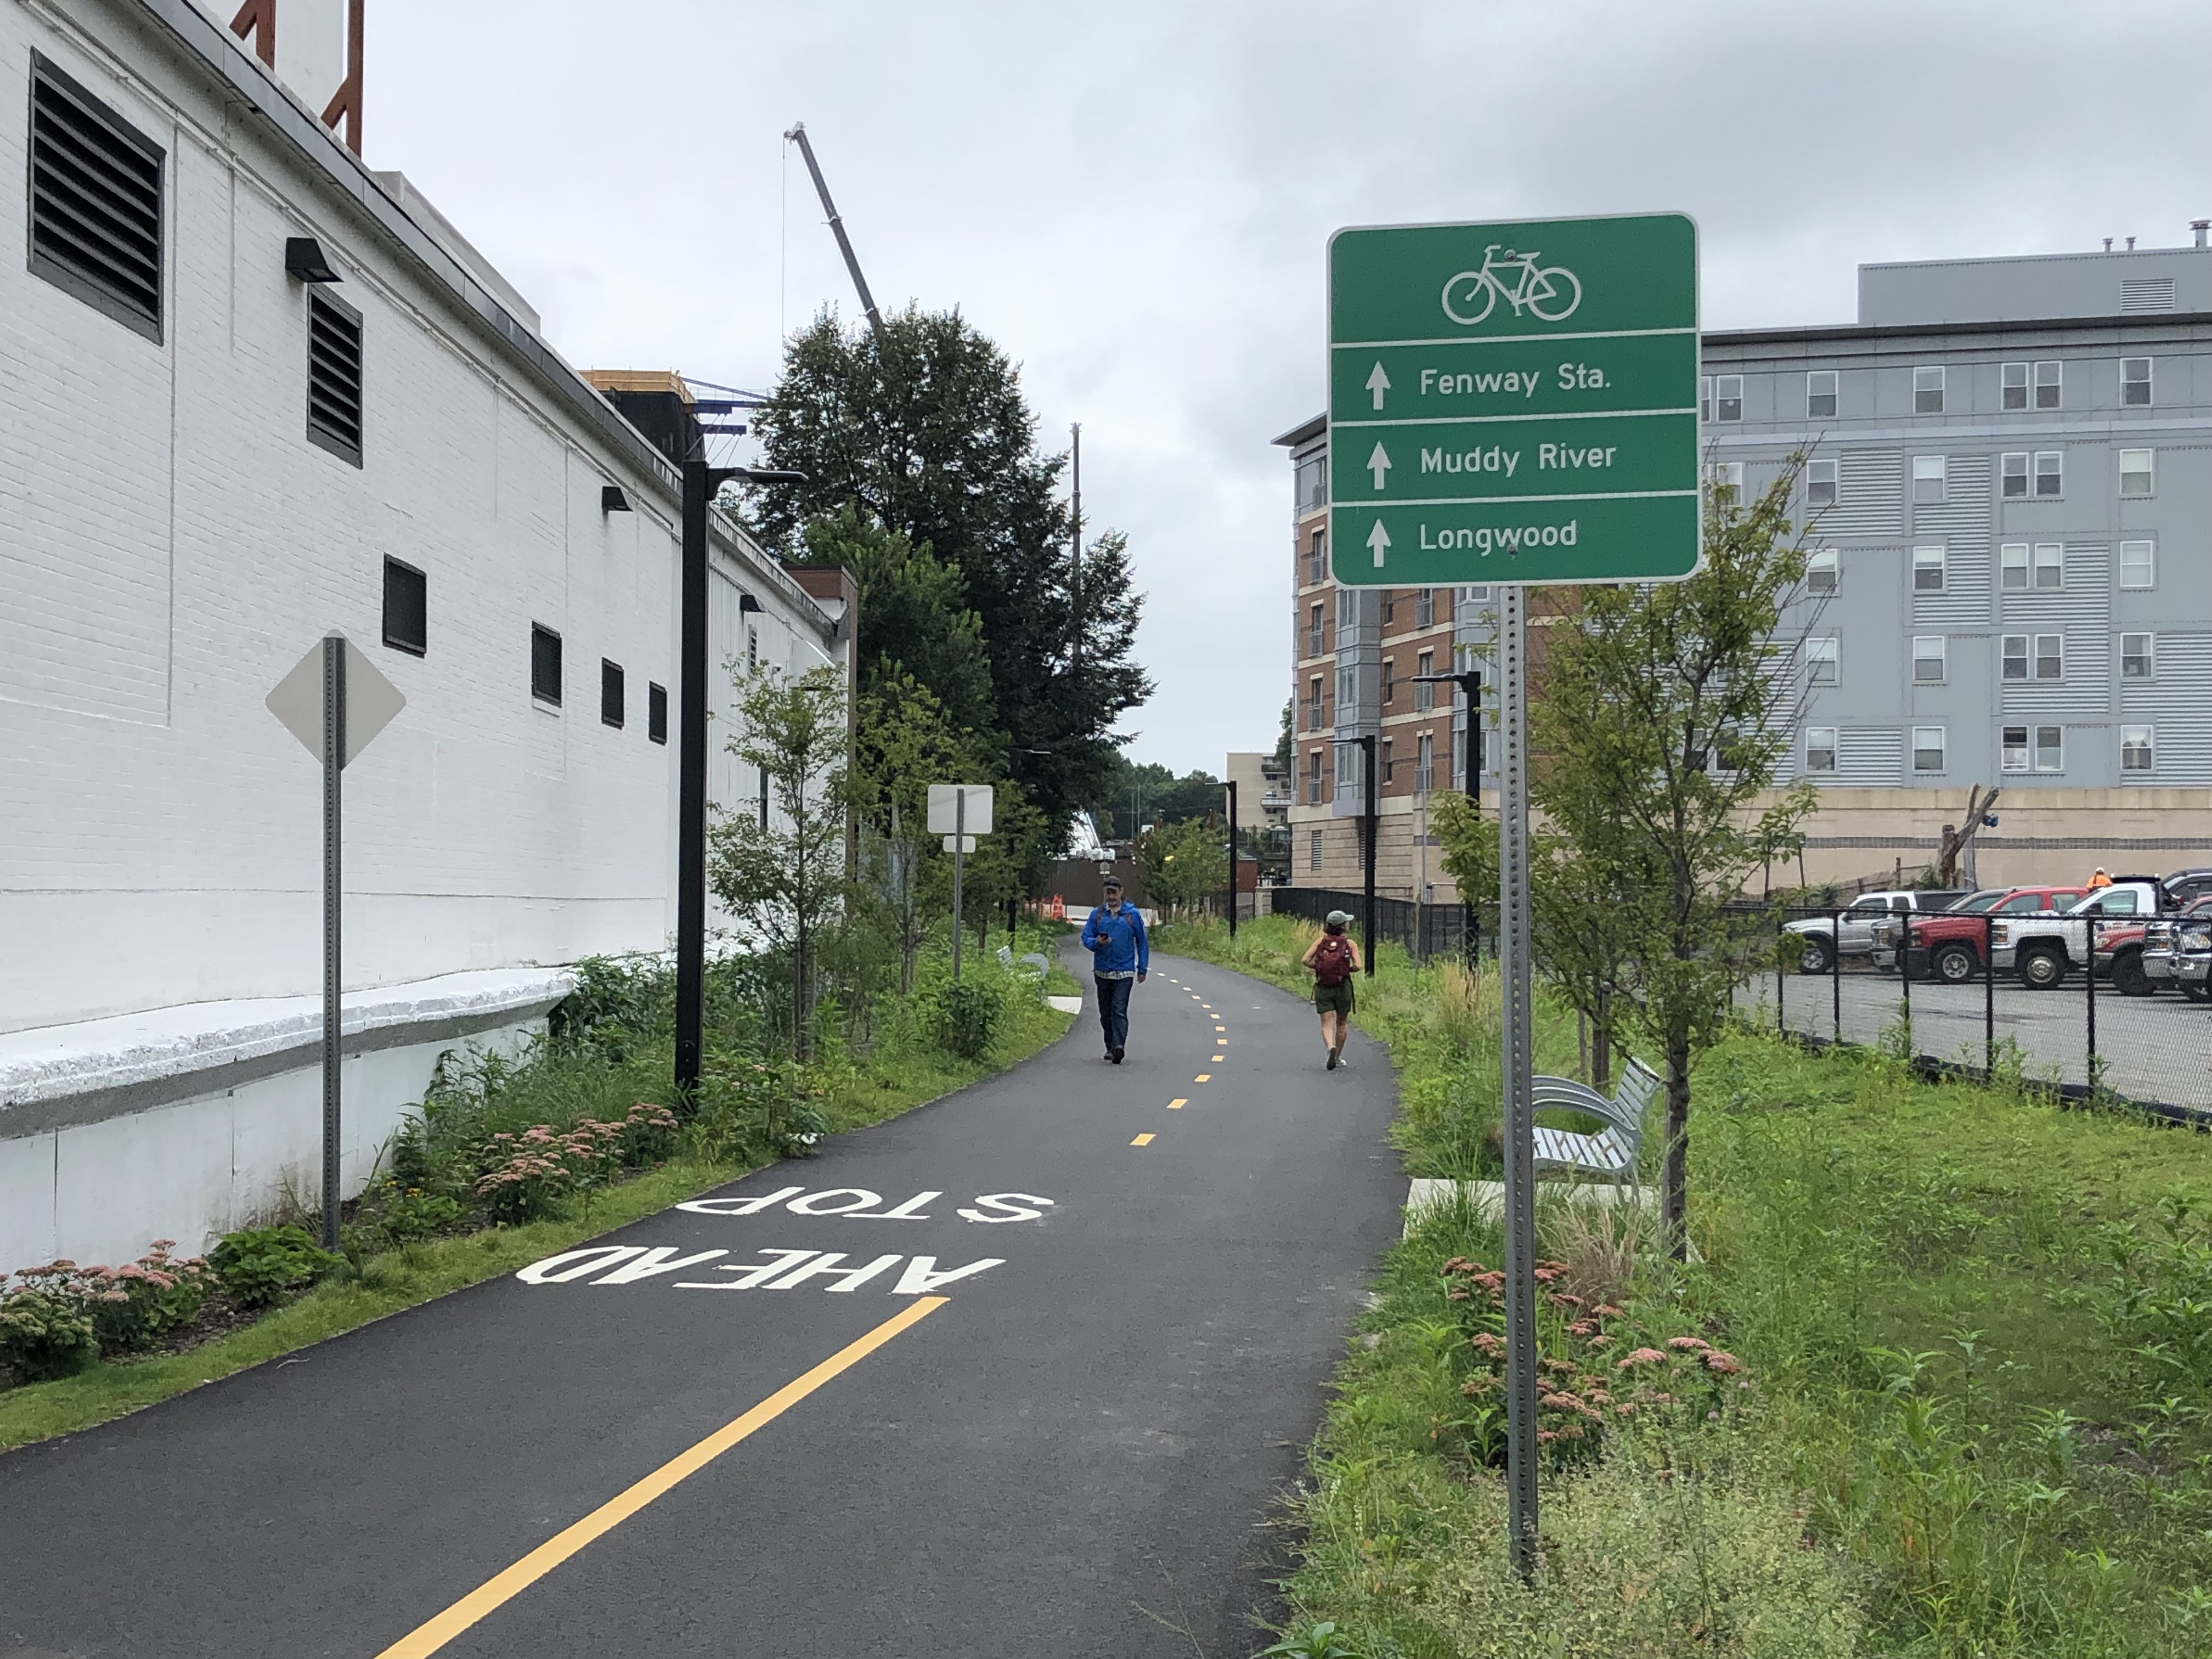 A paved asphalt bike and pedestrian path winds behind a single-story cinder block building on the left and a parking lot on the right. A green wayfinding sign shows three destinations, listed next to arrows that point straight down the path: Fenway Sta., Muddy River, and Longwood. In the middle distance two people walking are passing each other on the path, and further on in the distance is a crane at a construction site behind a multi-story apartment building.